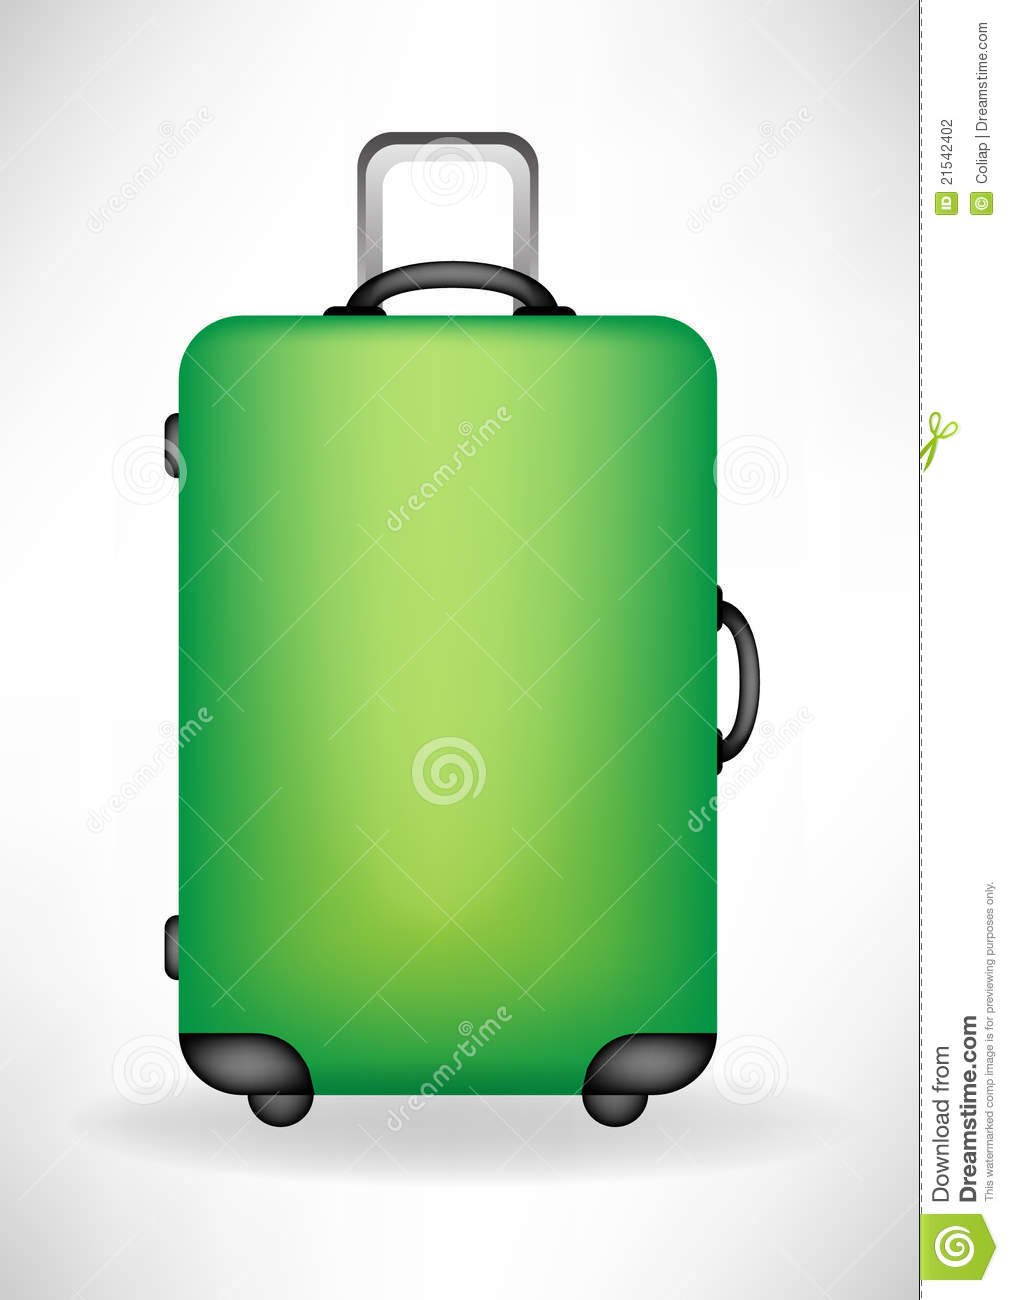 free clipart travel suitcase - photo #23